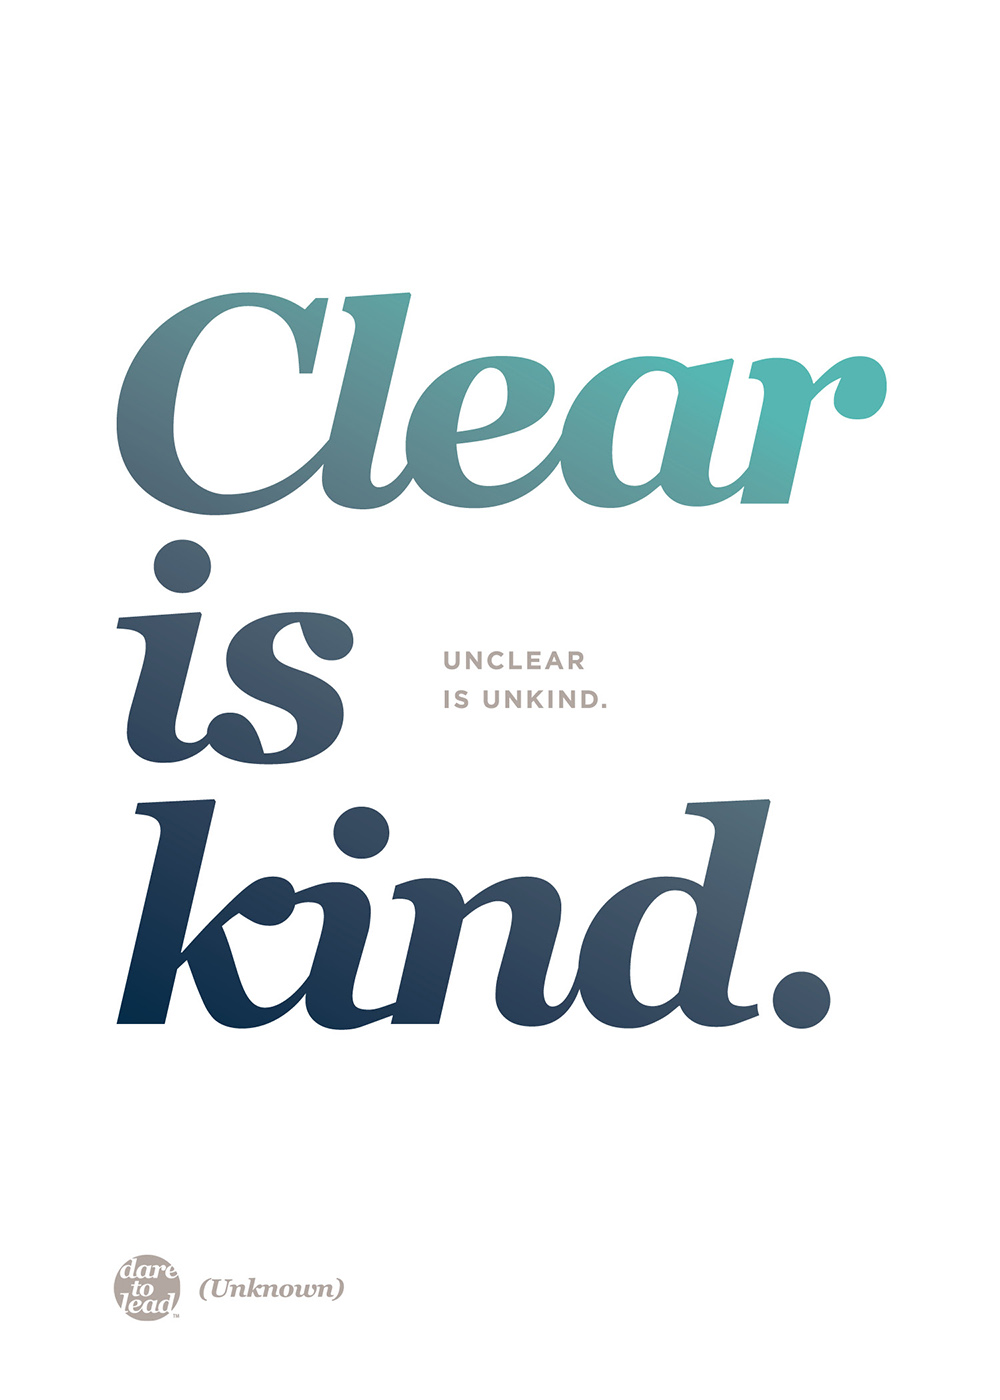 Clear is kind. Unclear is unkind. - Brené Brown